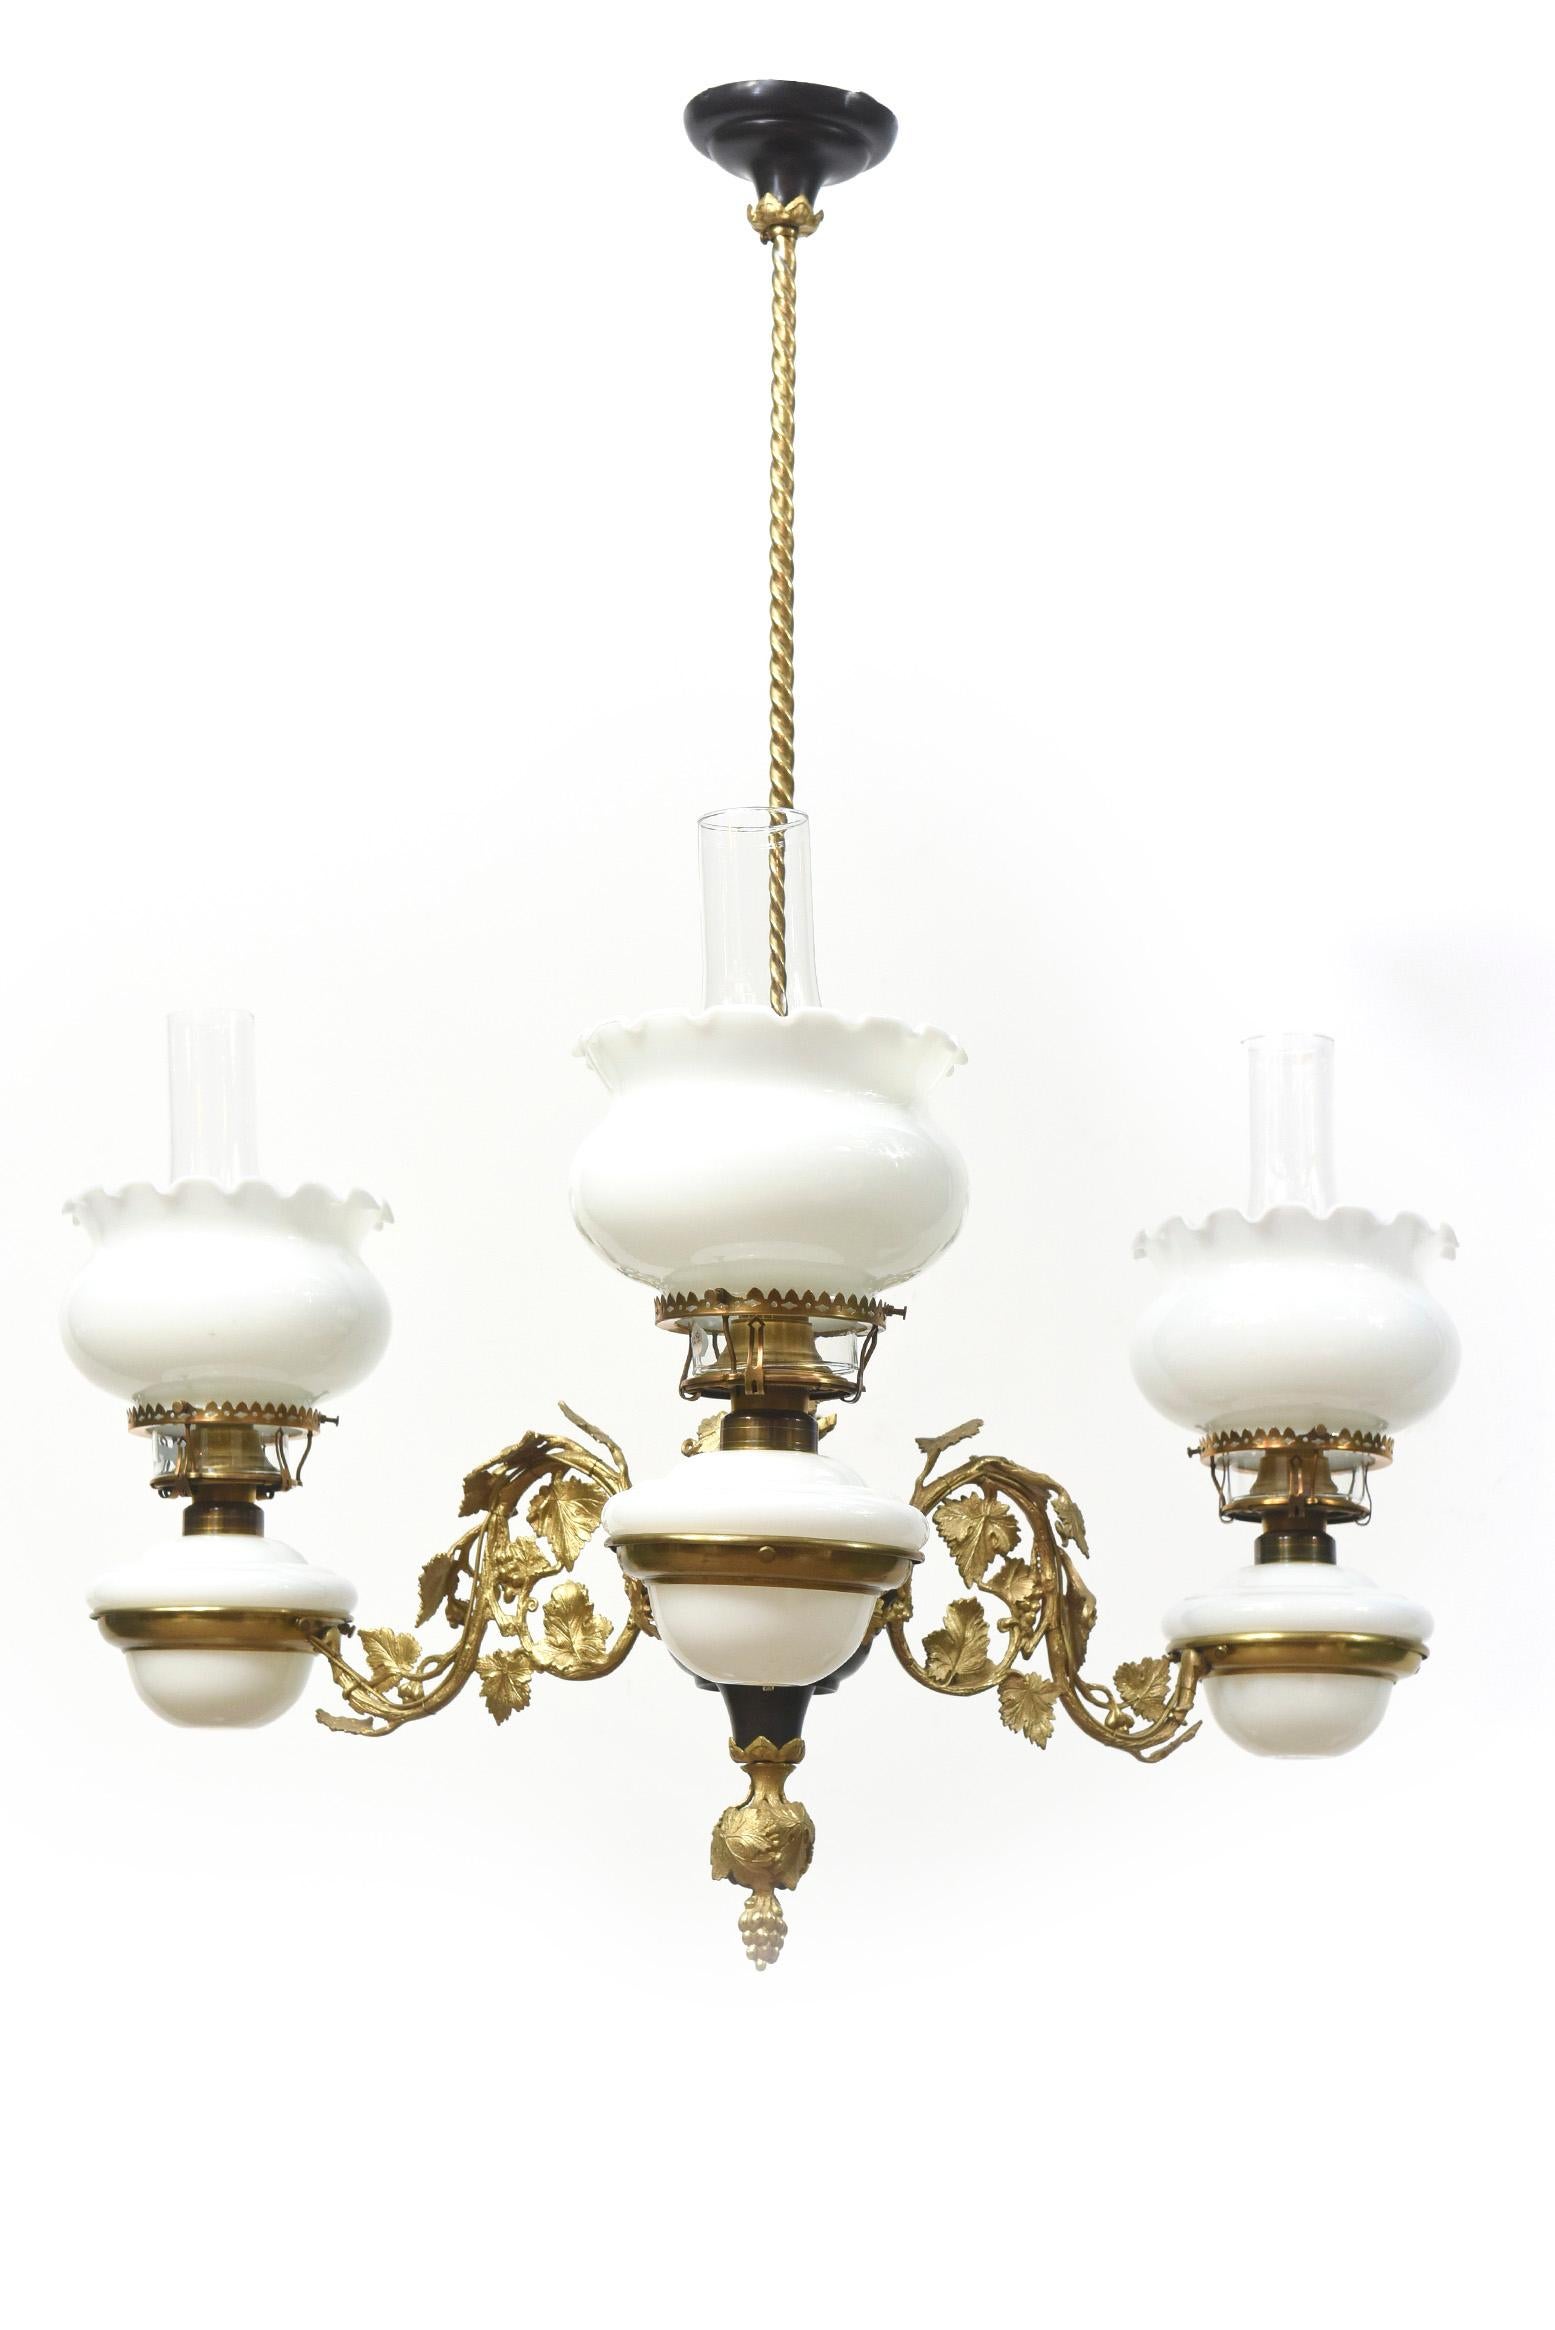 A lovely gilded era oil chandelier. Made by Henry Hooper C. 1870. Fine castings of grapevines on arms in gilt bronze. Brass body with a dark patina. White Glass shades and Oil Fonts. Suspended from a slender roped tube. Rococo Revival. American.